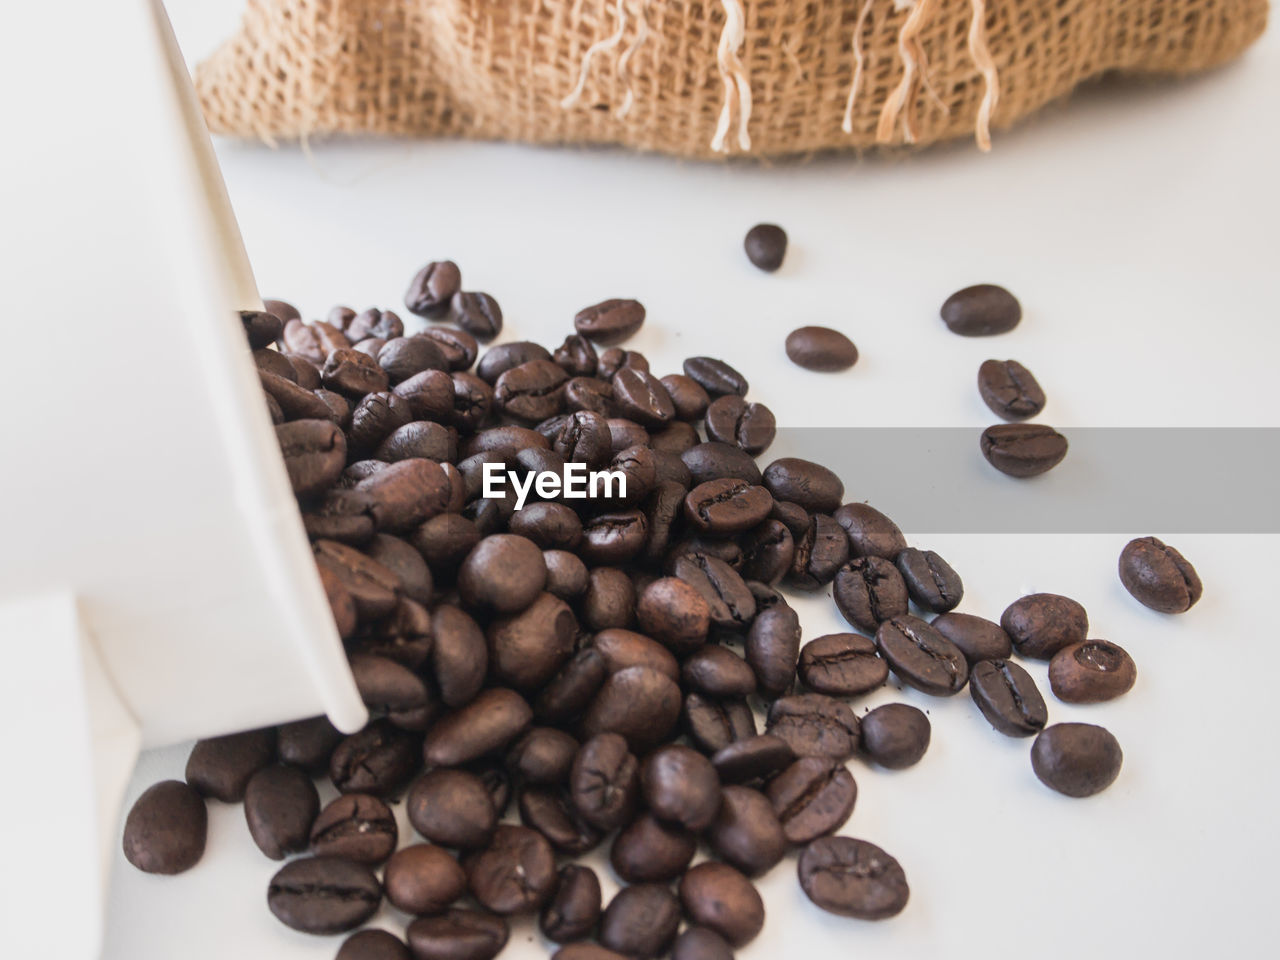 HIGH ANGLE VIEW OF COFFEE BEANS IN GLASS ON TABLE